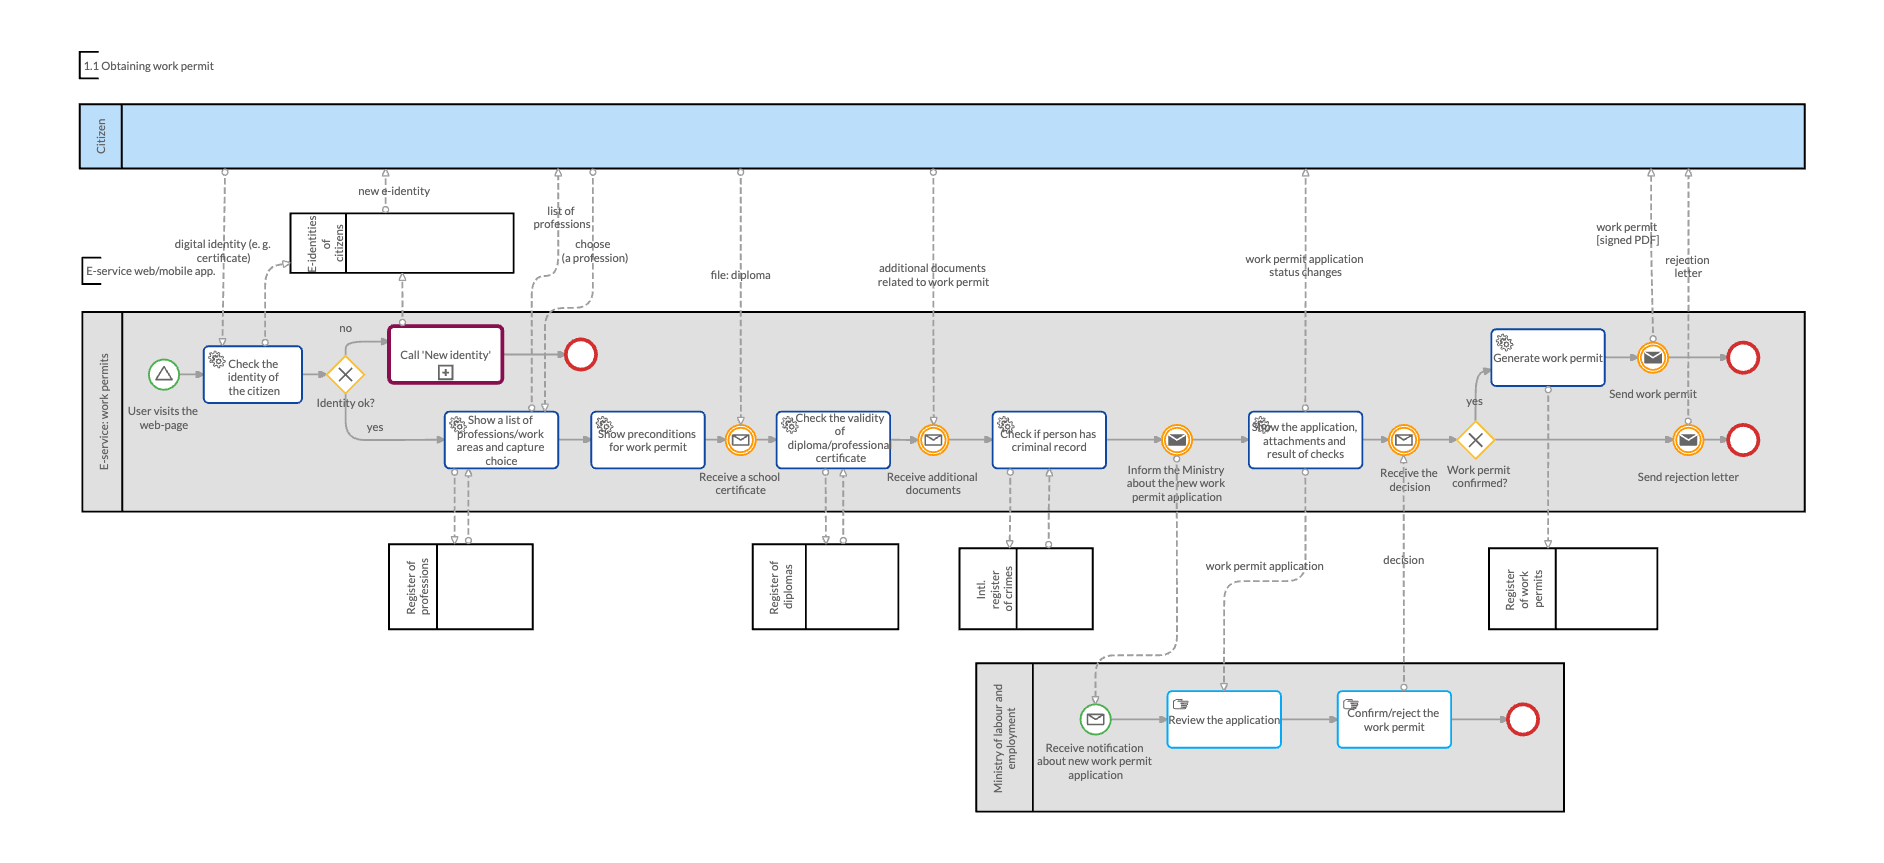 A detailed BPMN workflow for getting a work permit